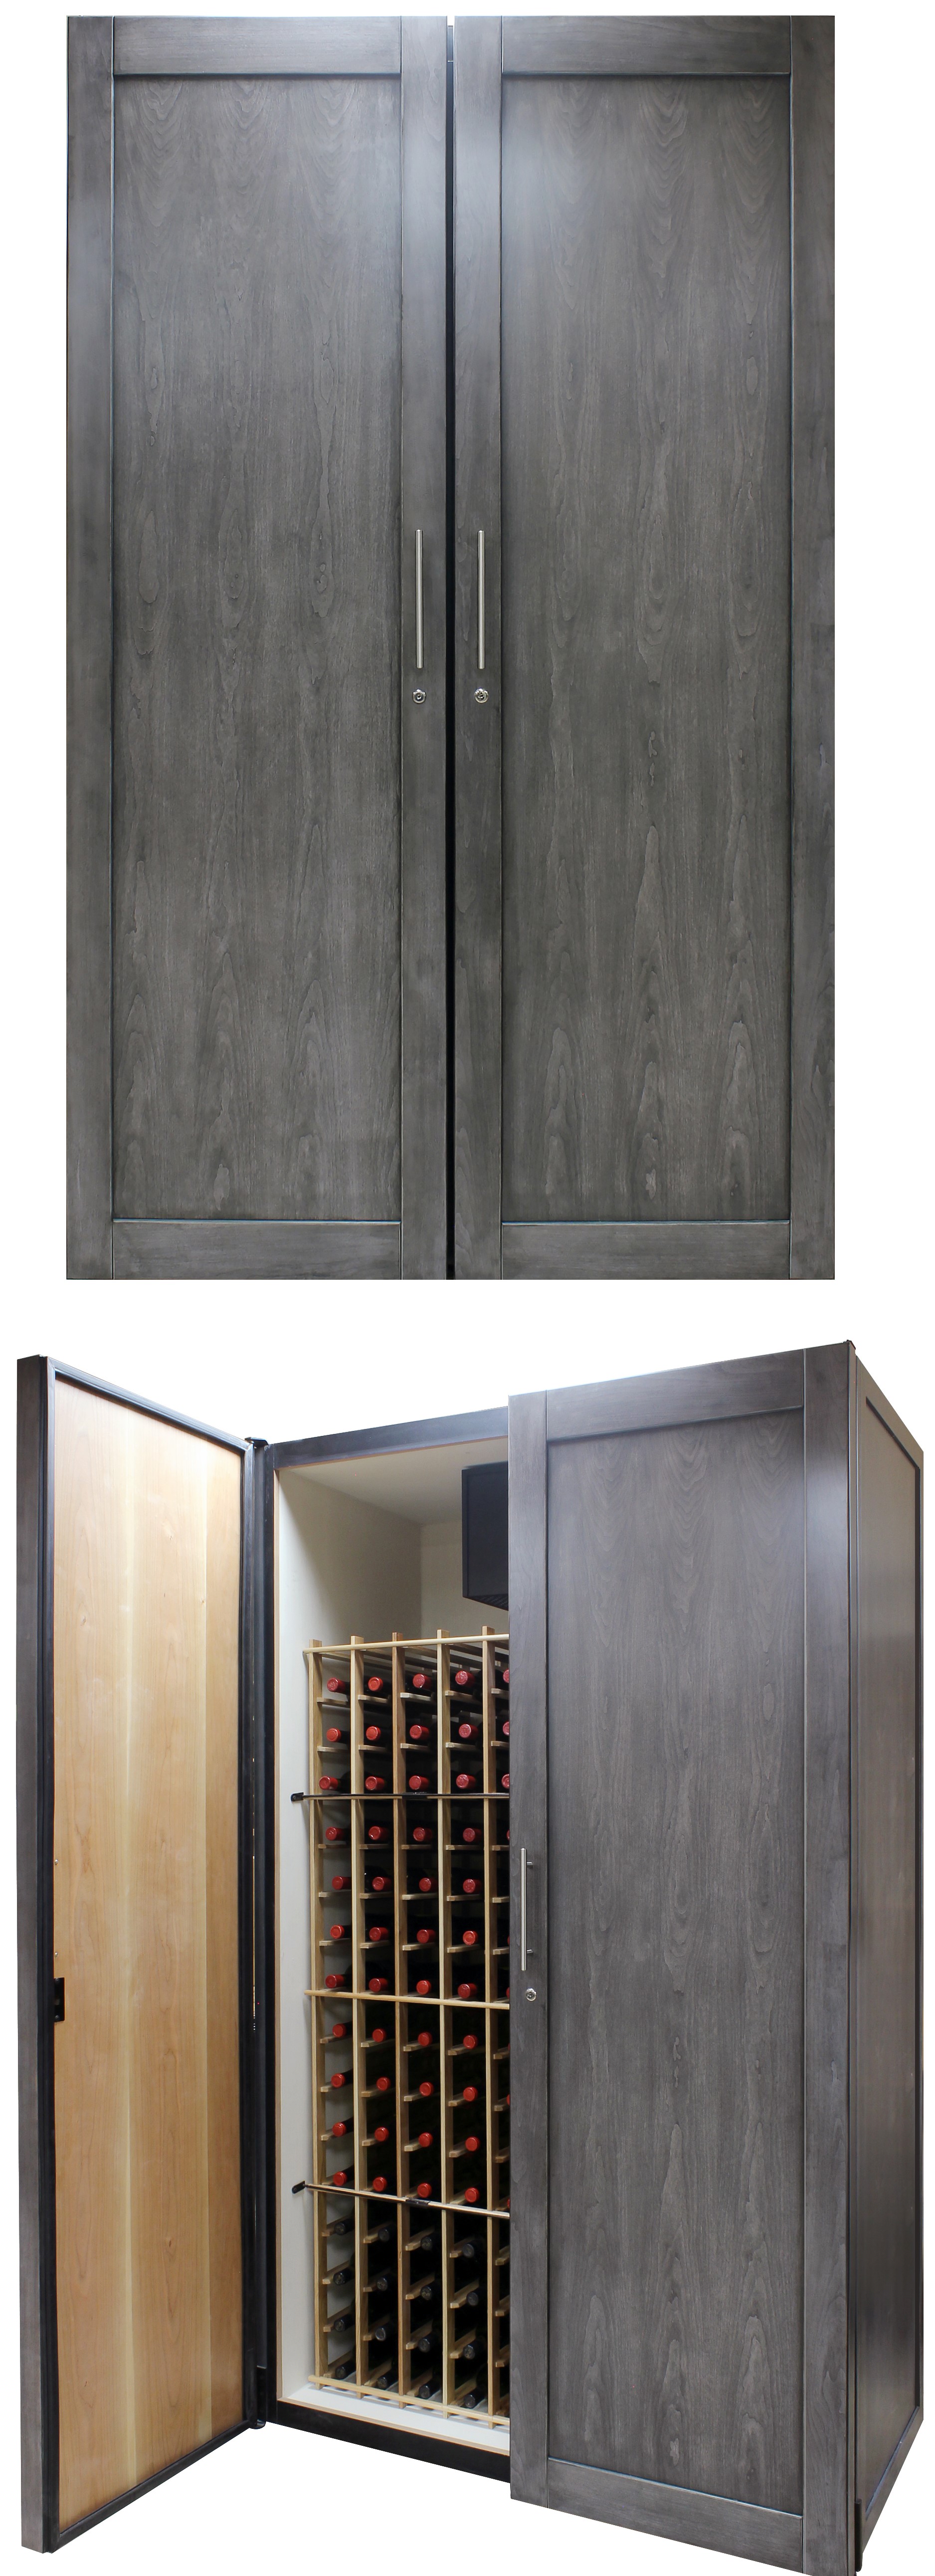 Vinotemp Wine Vault featuring Wine-Mate 1500CD and handcrafted wine racking for long-term storage of up to 368 bottles of wine.